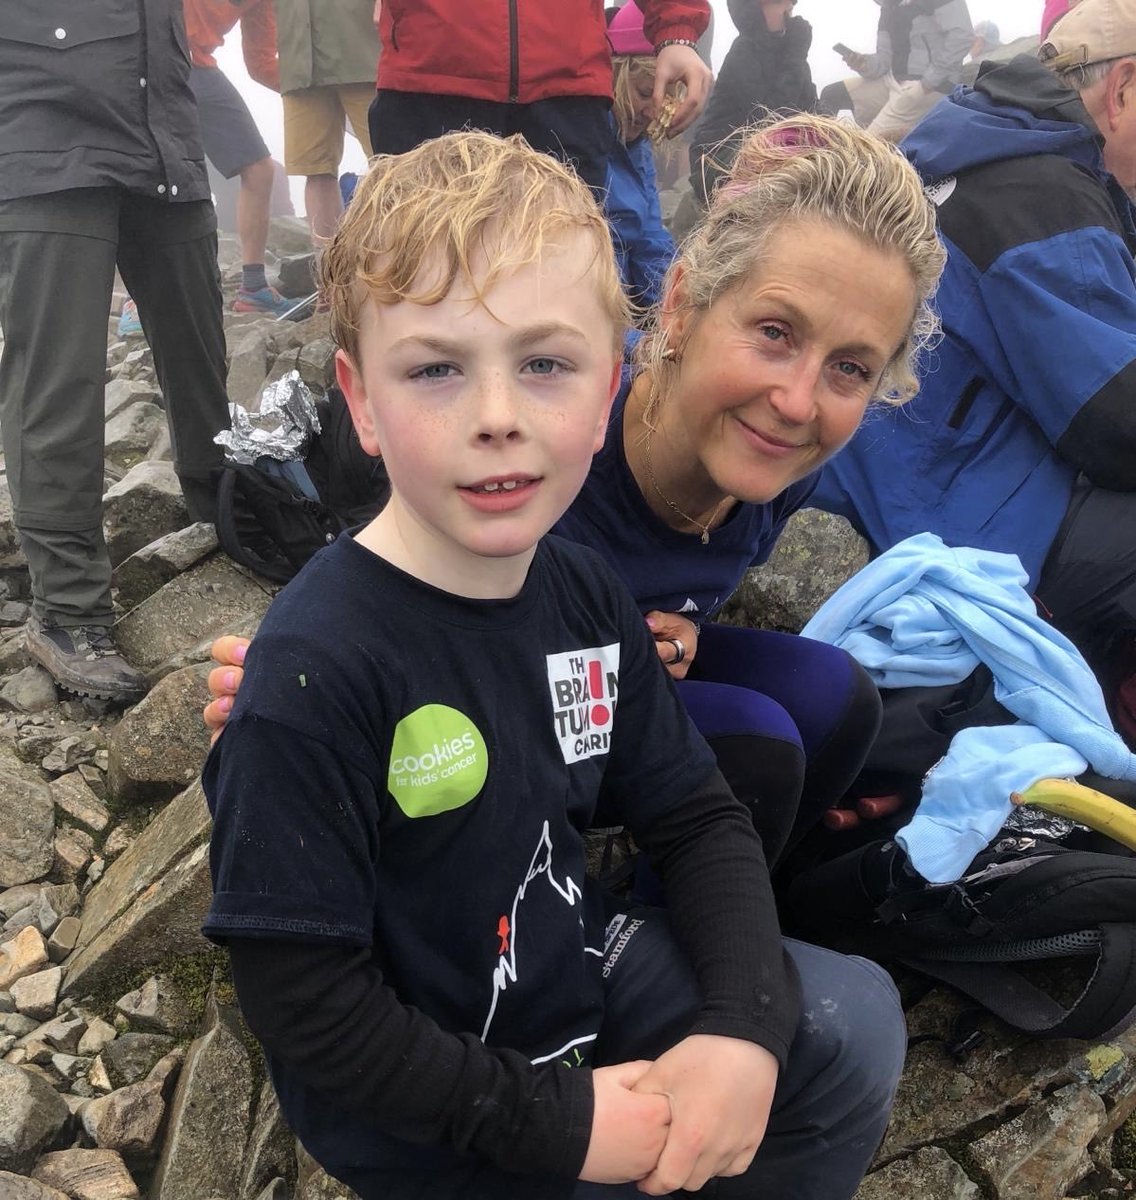 Here are me and my new friend Arthur on top of scafell pike - I wrote about him here medium.com/@marthalanefox…